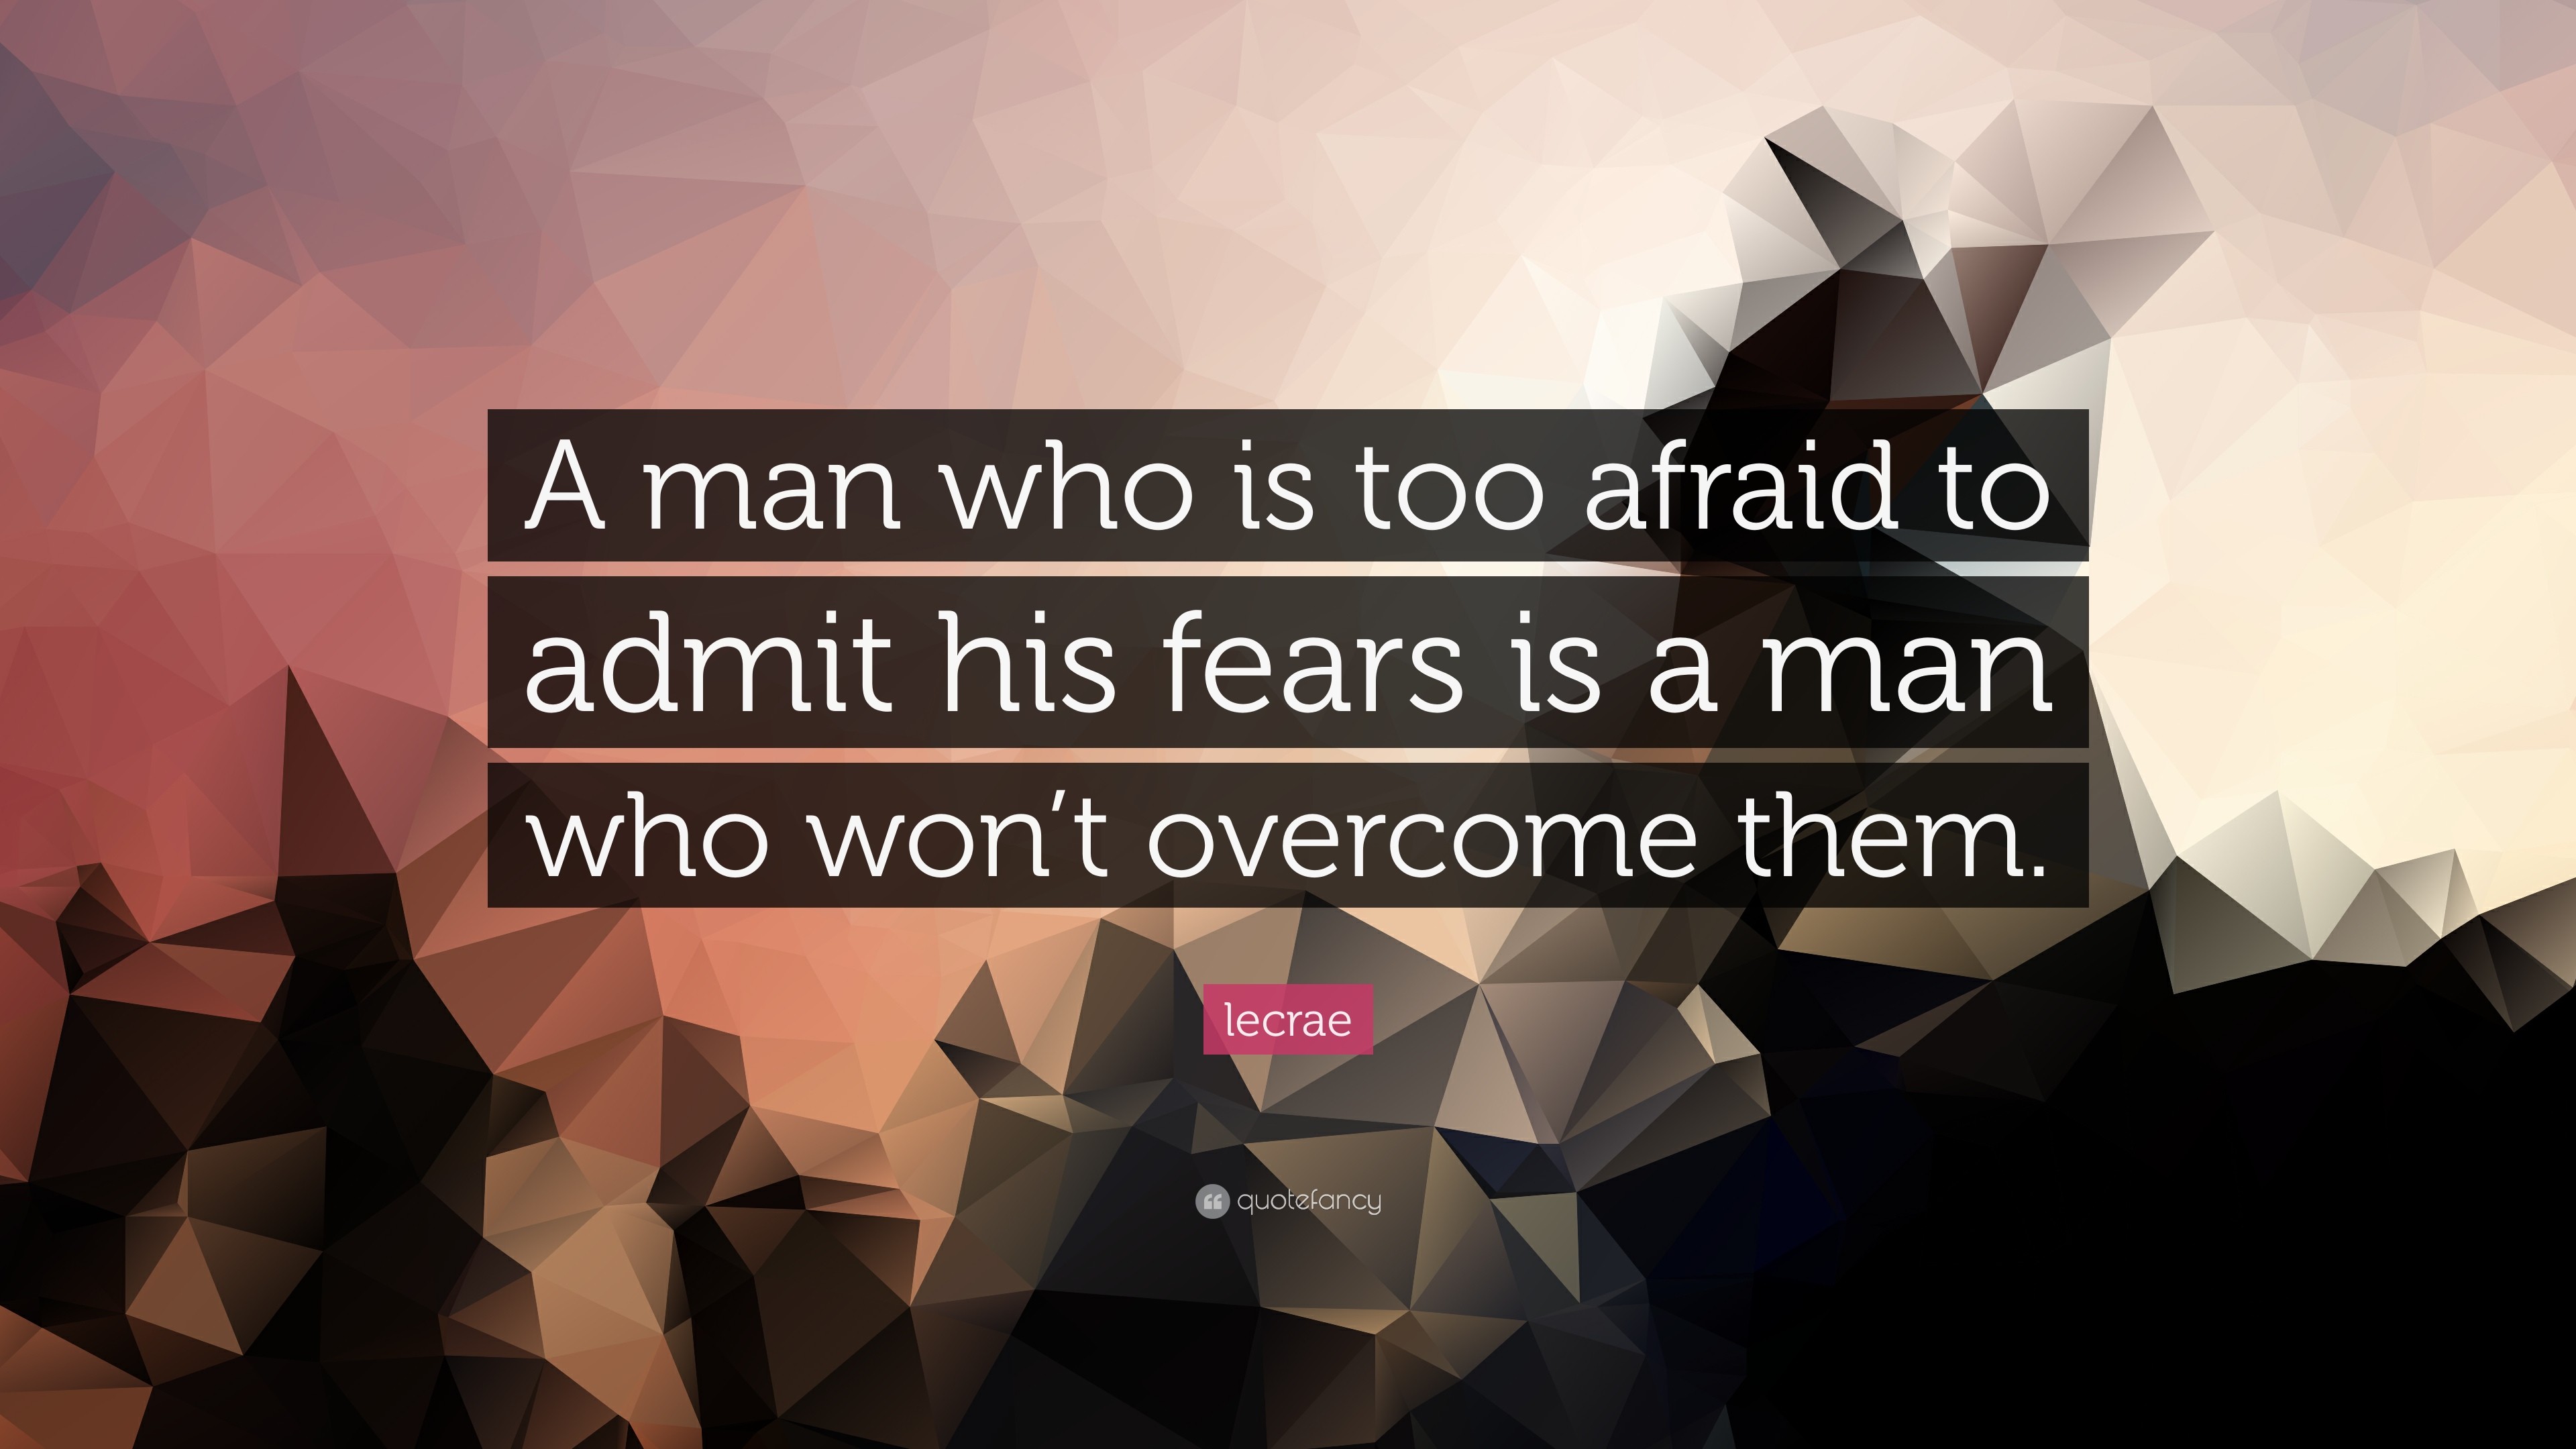 3840x2160 Lecrae Quote: “A man who is too afraid to admit his fears is a